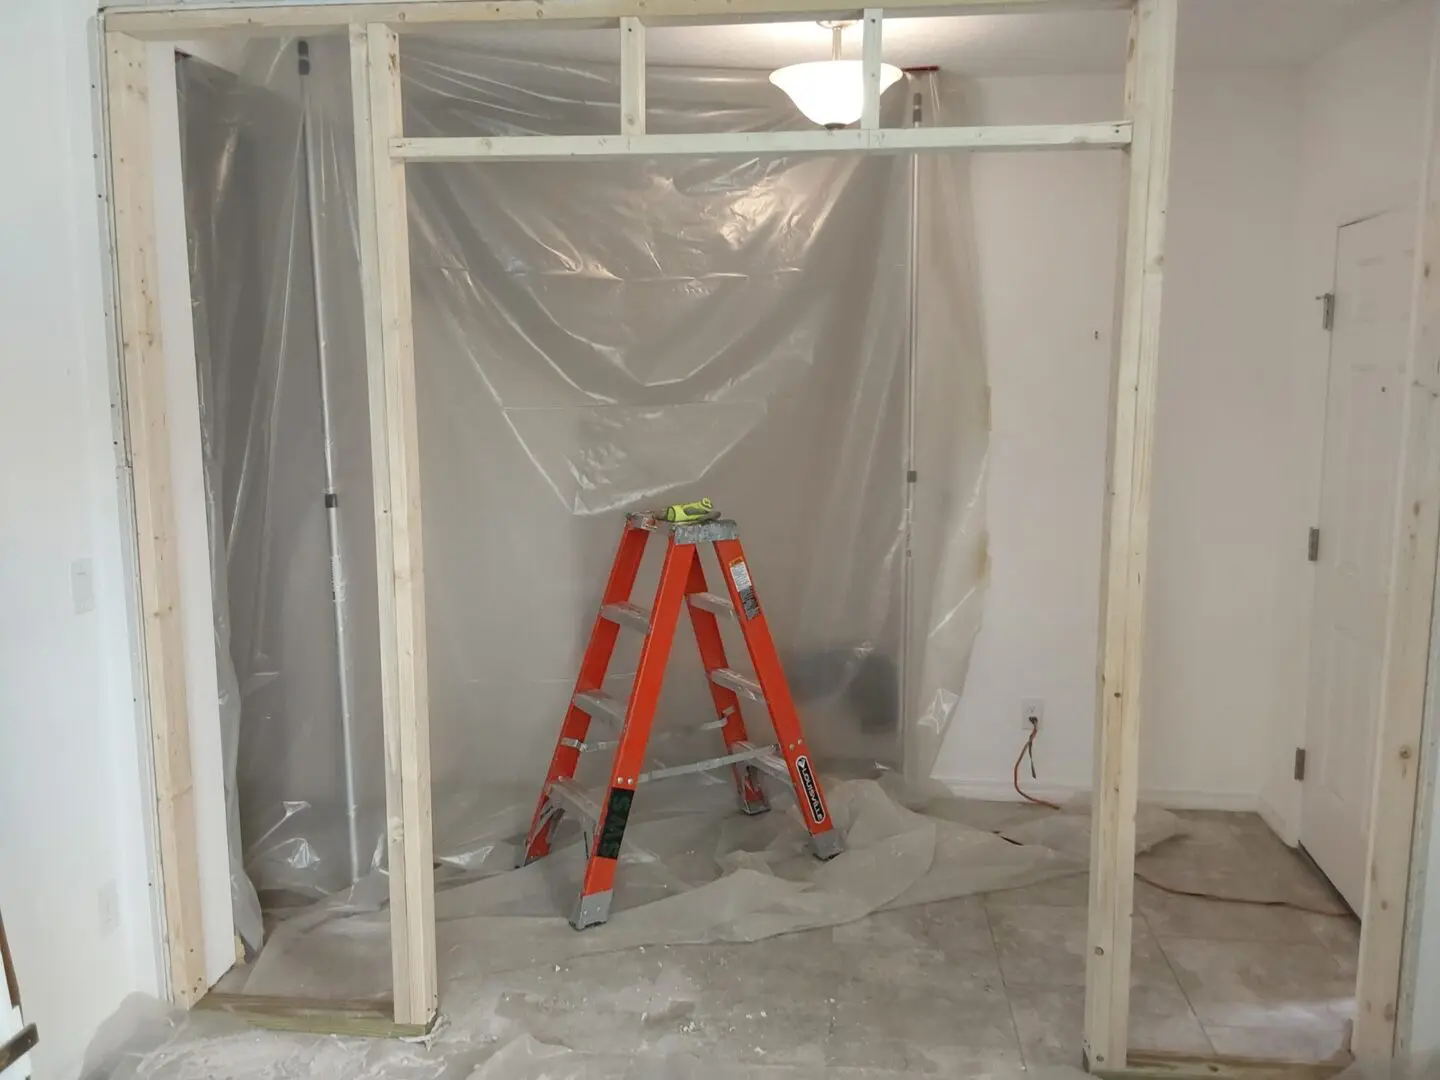 A ladder in the middle of a room with some plastic sheeting on it.